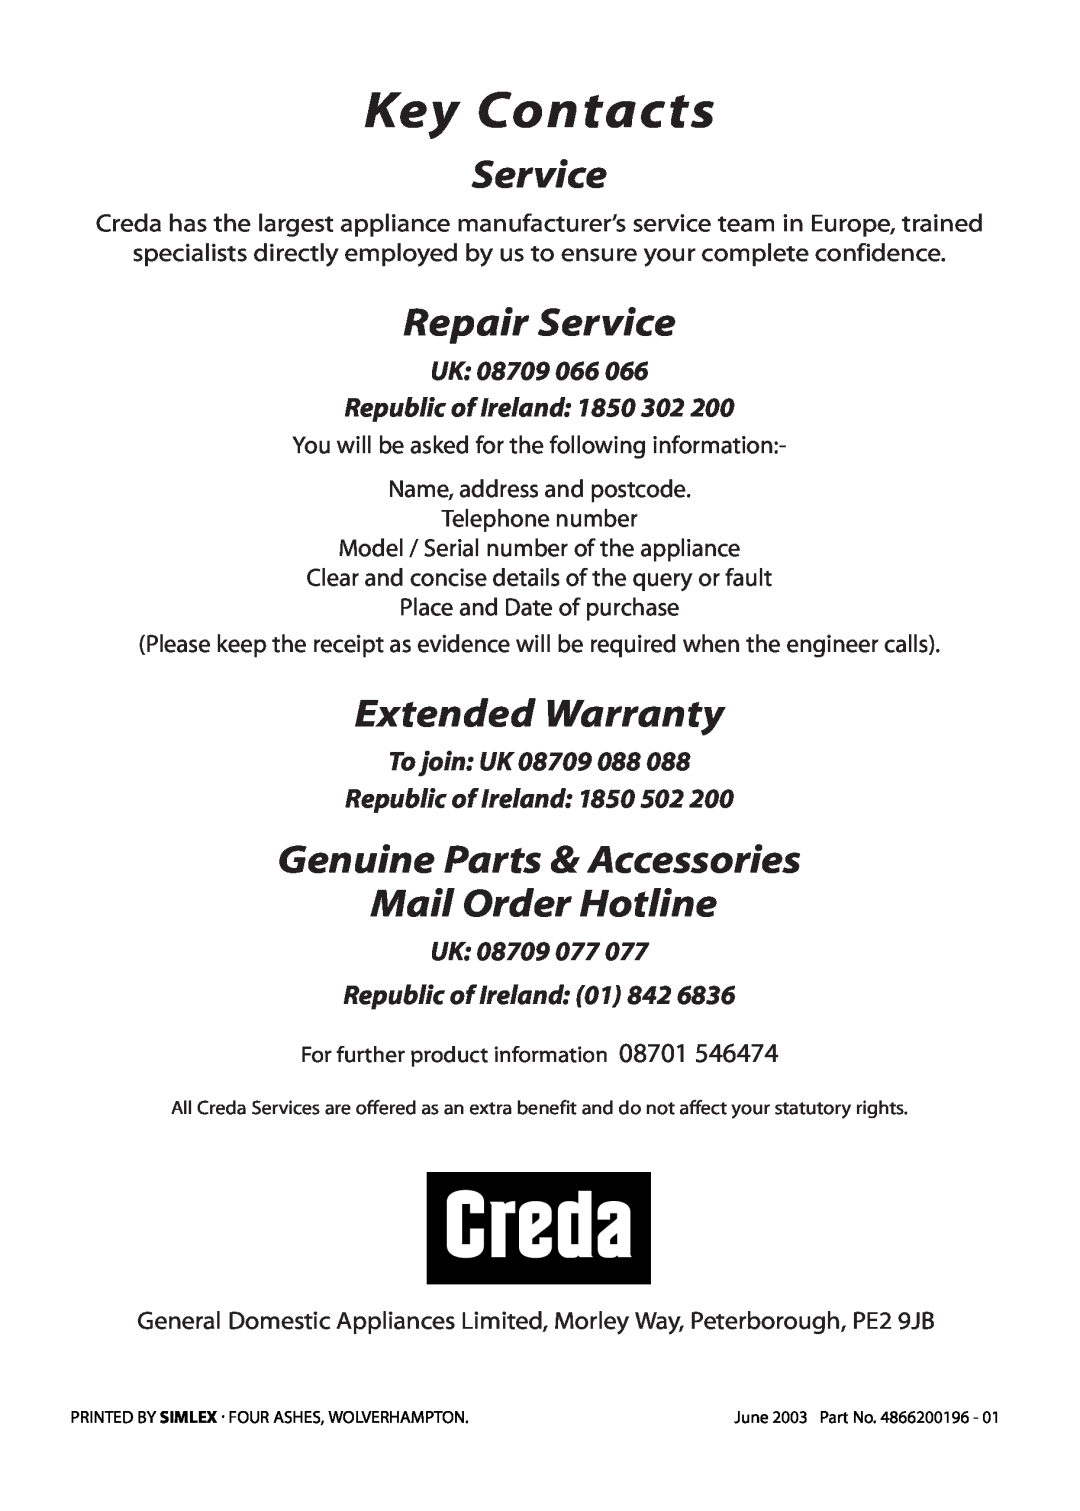 Creda S150E manual Key Contacts, Repair Service, Extended Warranty, Genuine Parts & Accessories Mail Order Hotline 